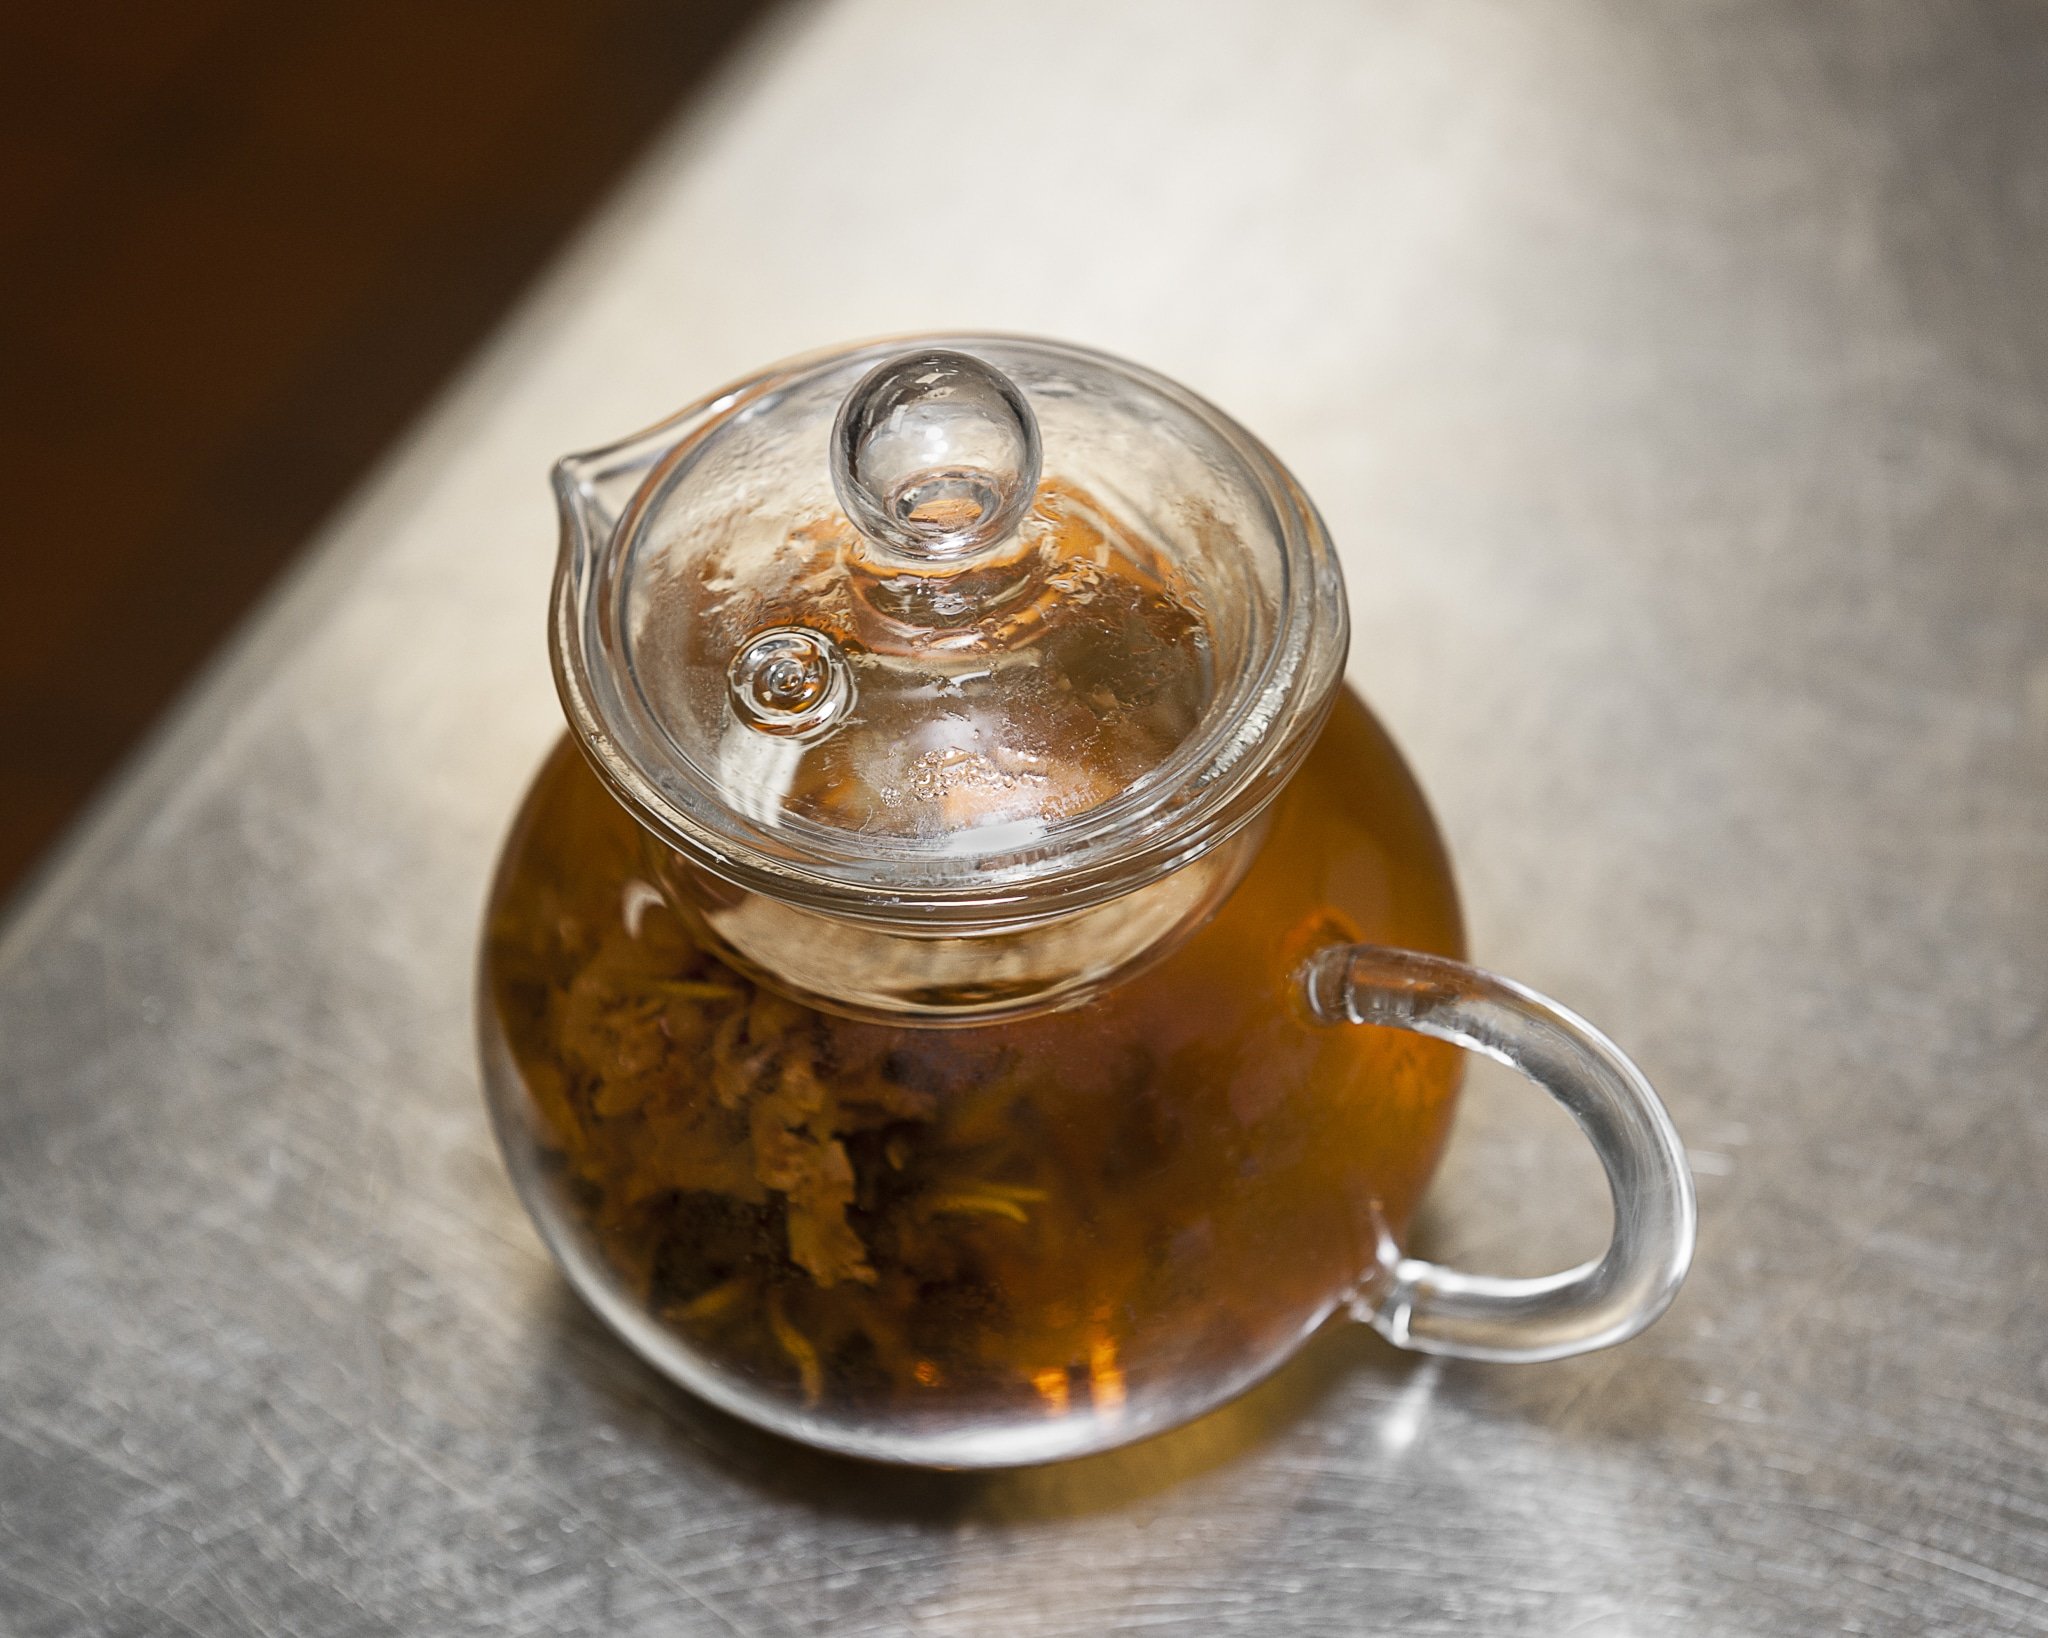 A glass tea pot containing a bud-like that appears to bloom when it is steeped.